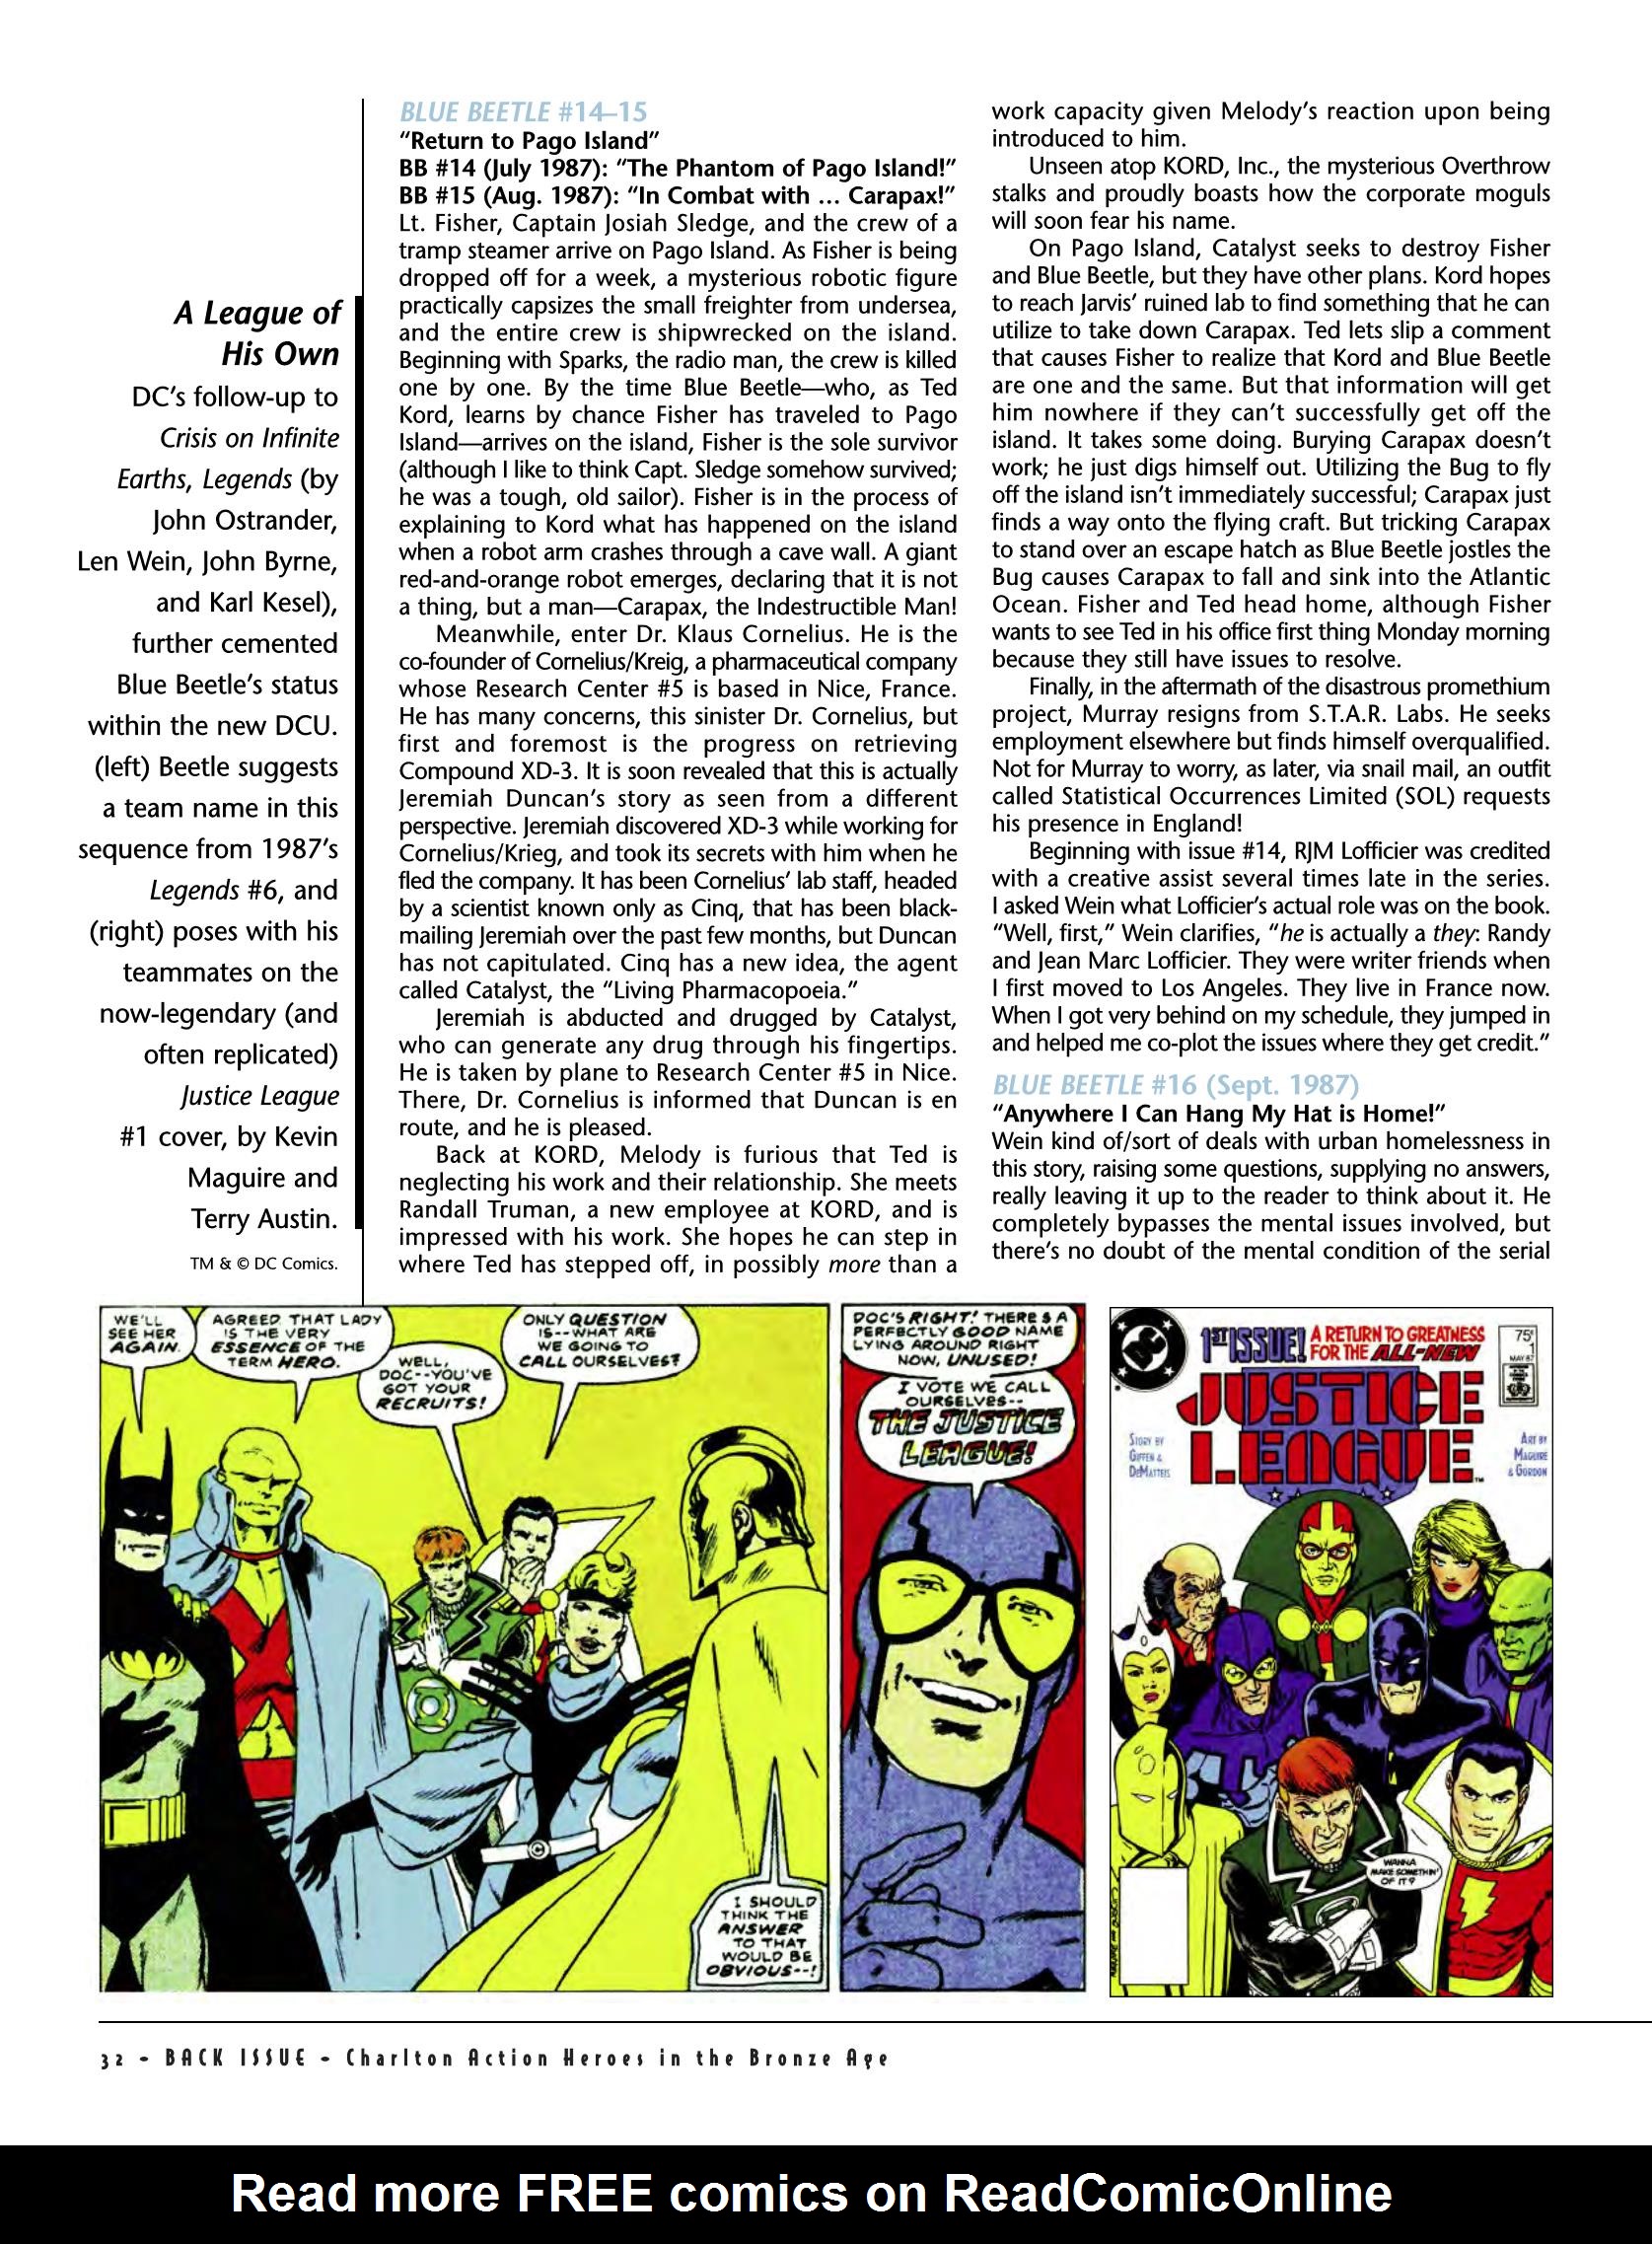 Read online Back Issue comic -  Issue #79 - 34